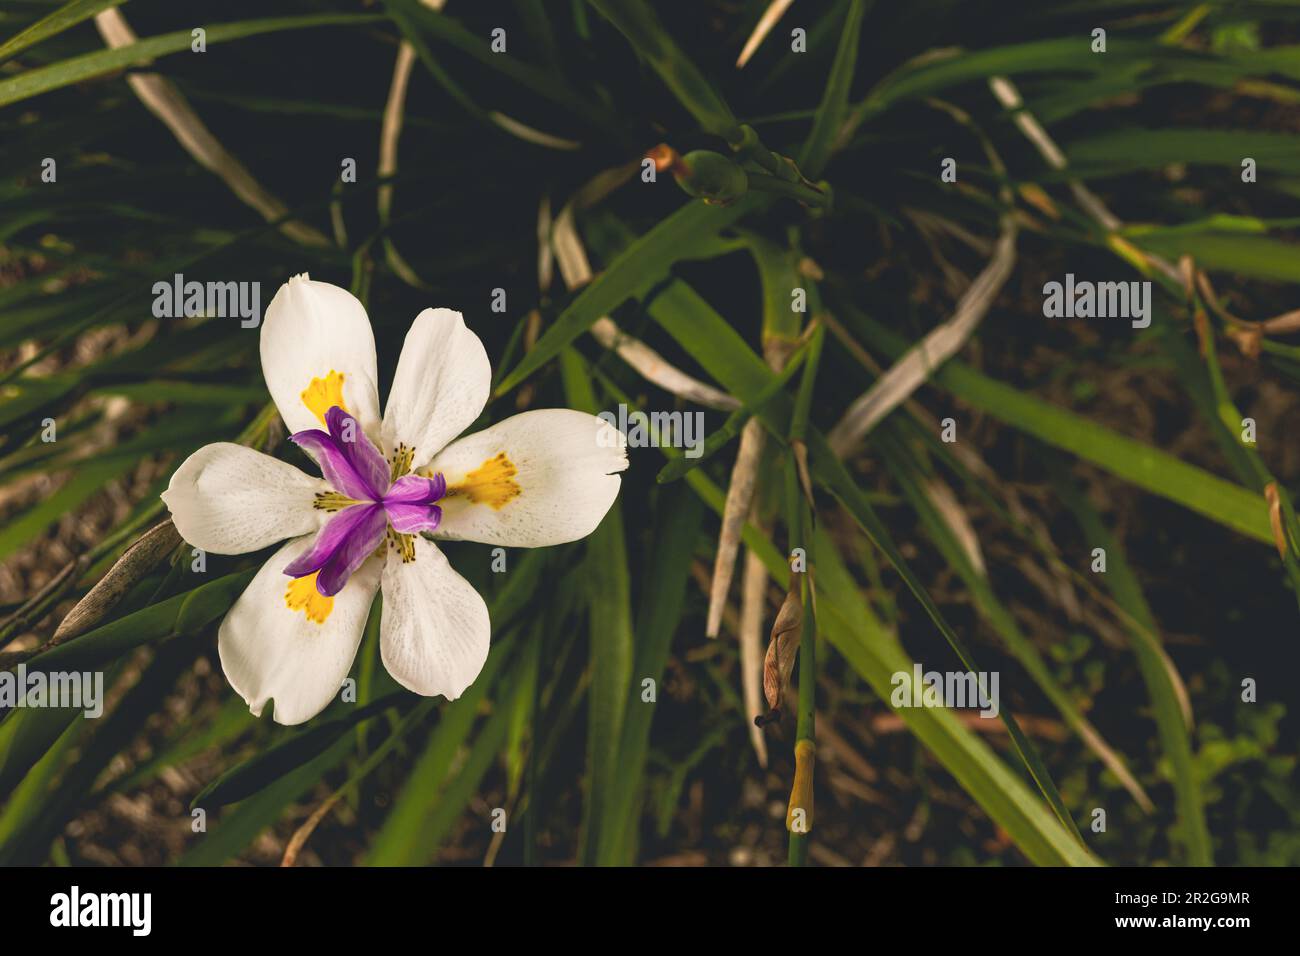 High angle view of an iris flower in bloom in garden Stock Photo